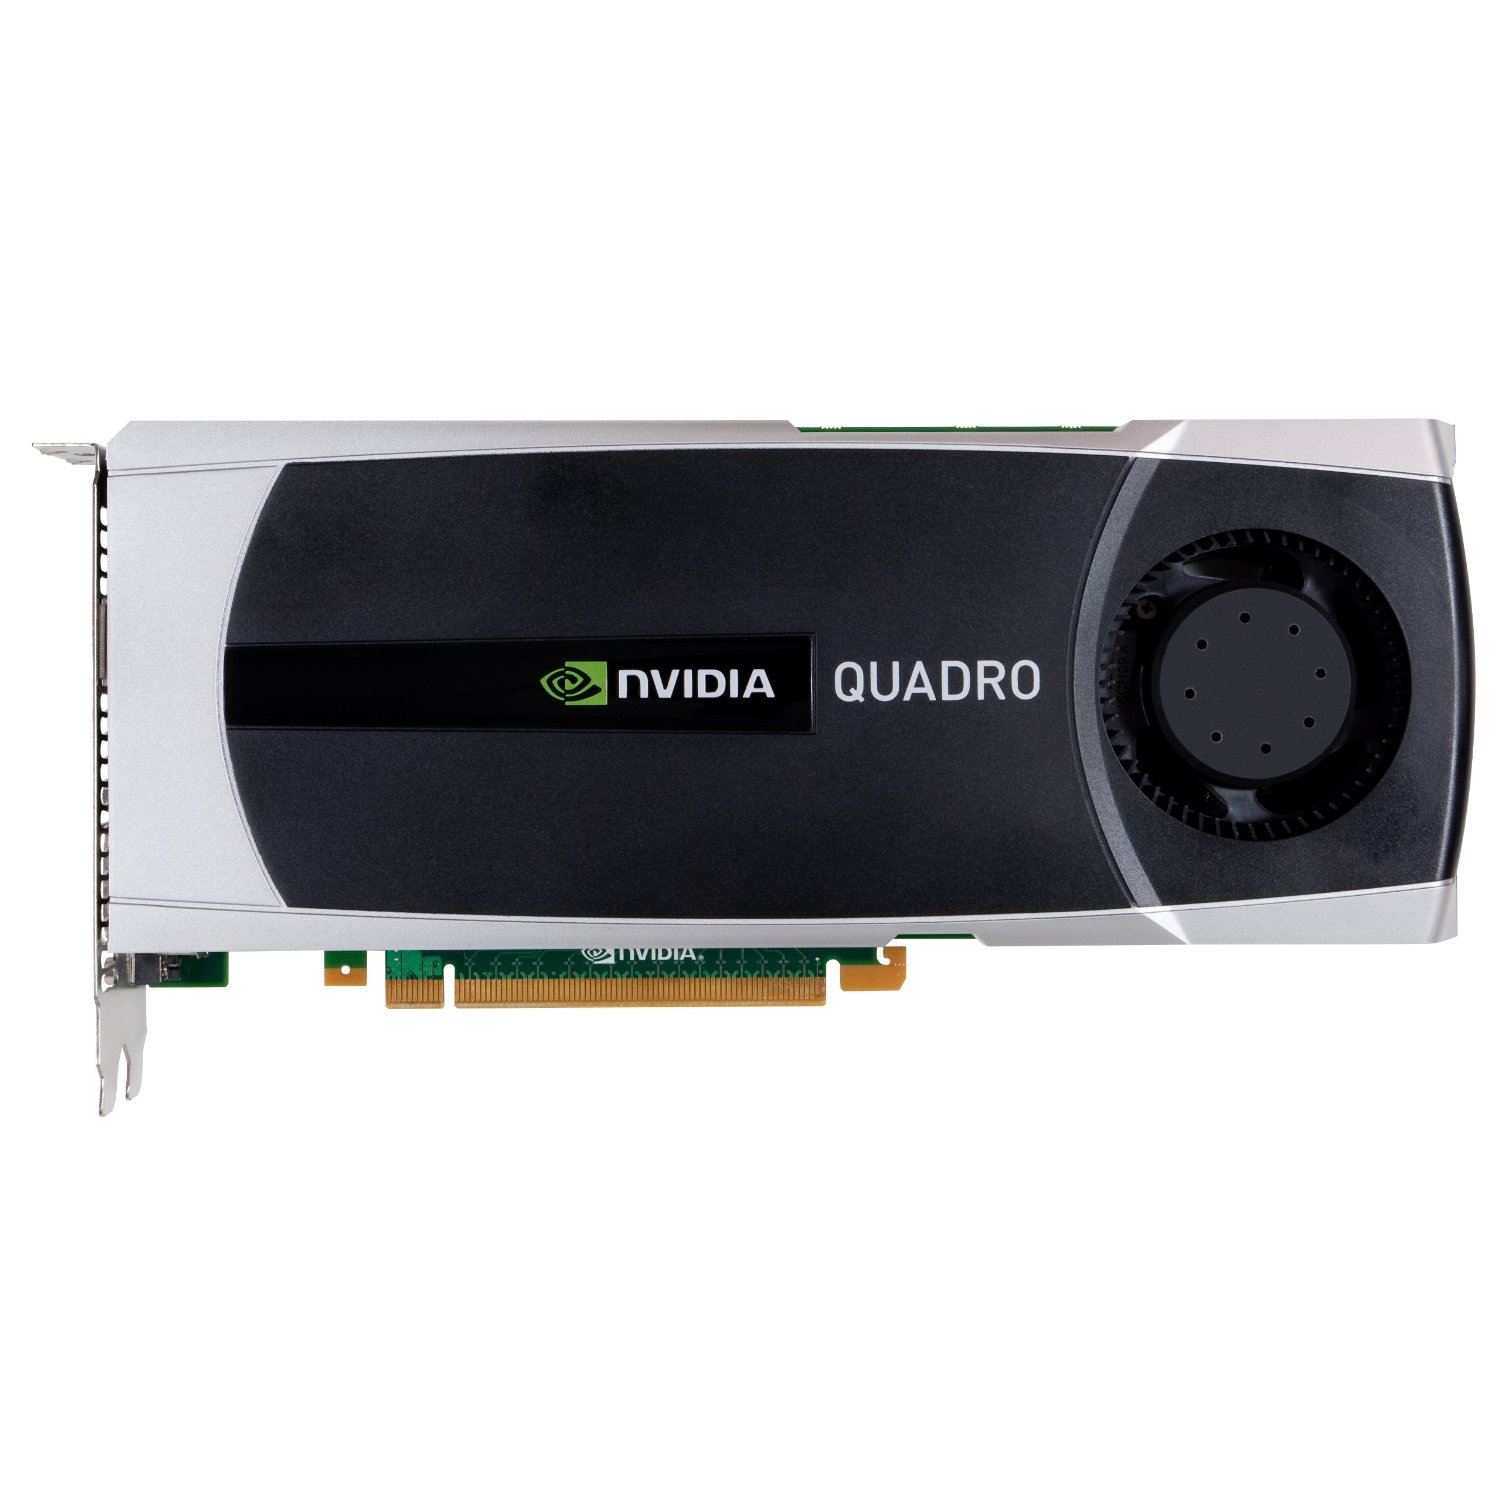 http://thetechjournal.com/wp-content/uploads/images/1112/1325149051-nvidia-quadro-6000-by-pny-6gb-gddr5-pci-express-graphics-card-3.jpg